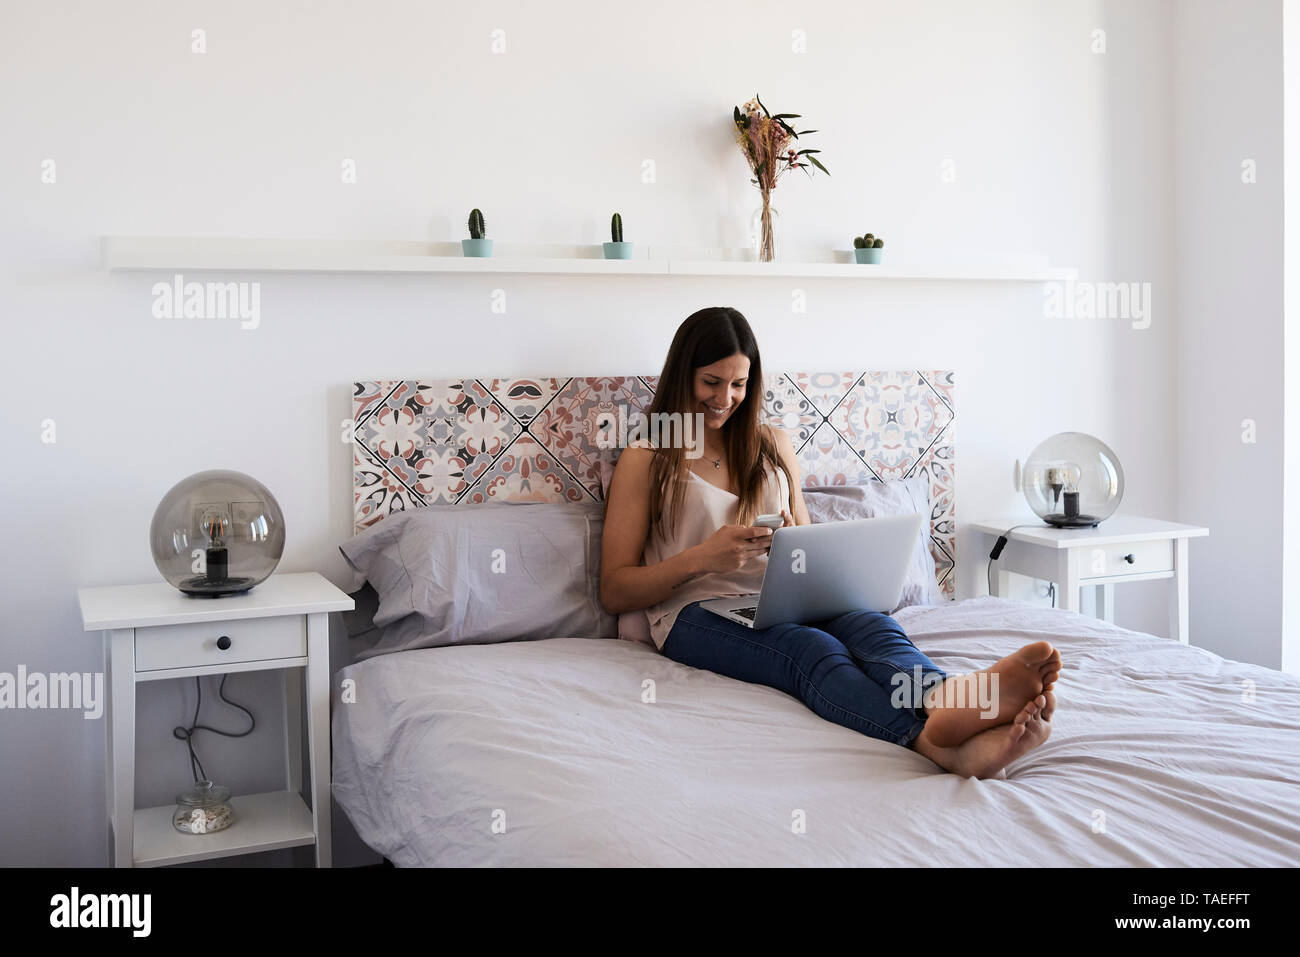 Smiling young woman sitting on bed with laptop using smartphone Banque D'Images